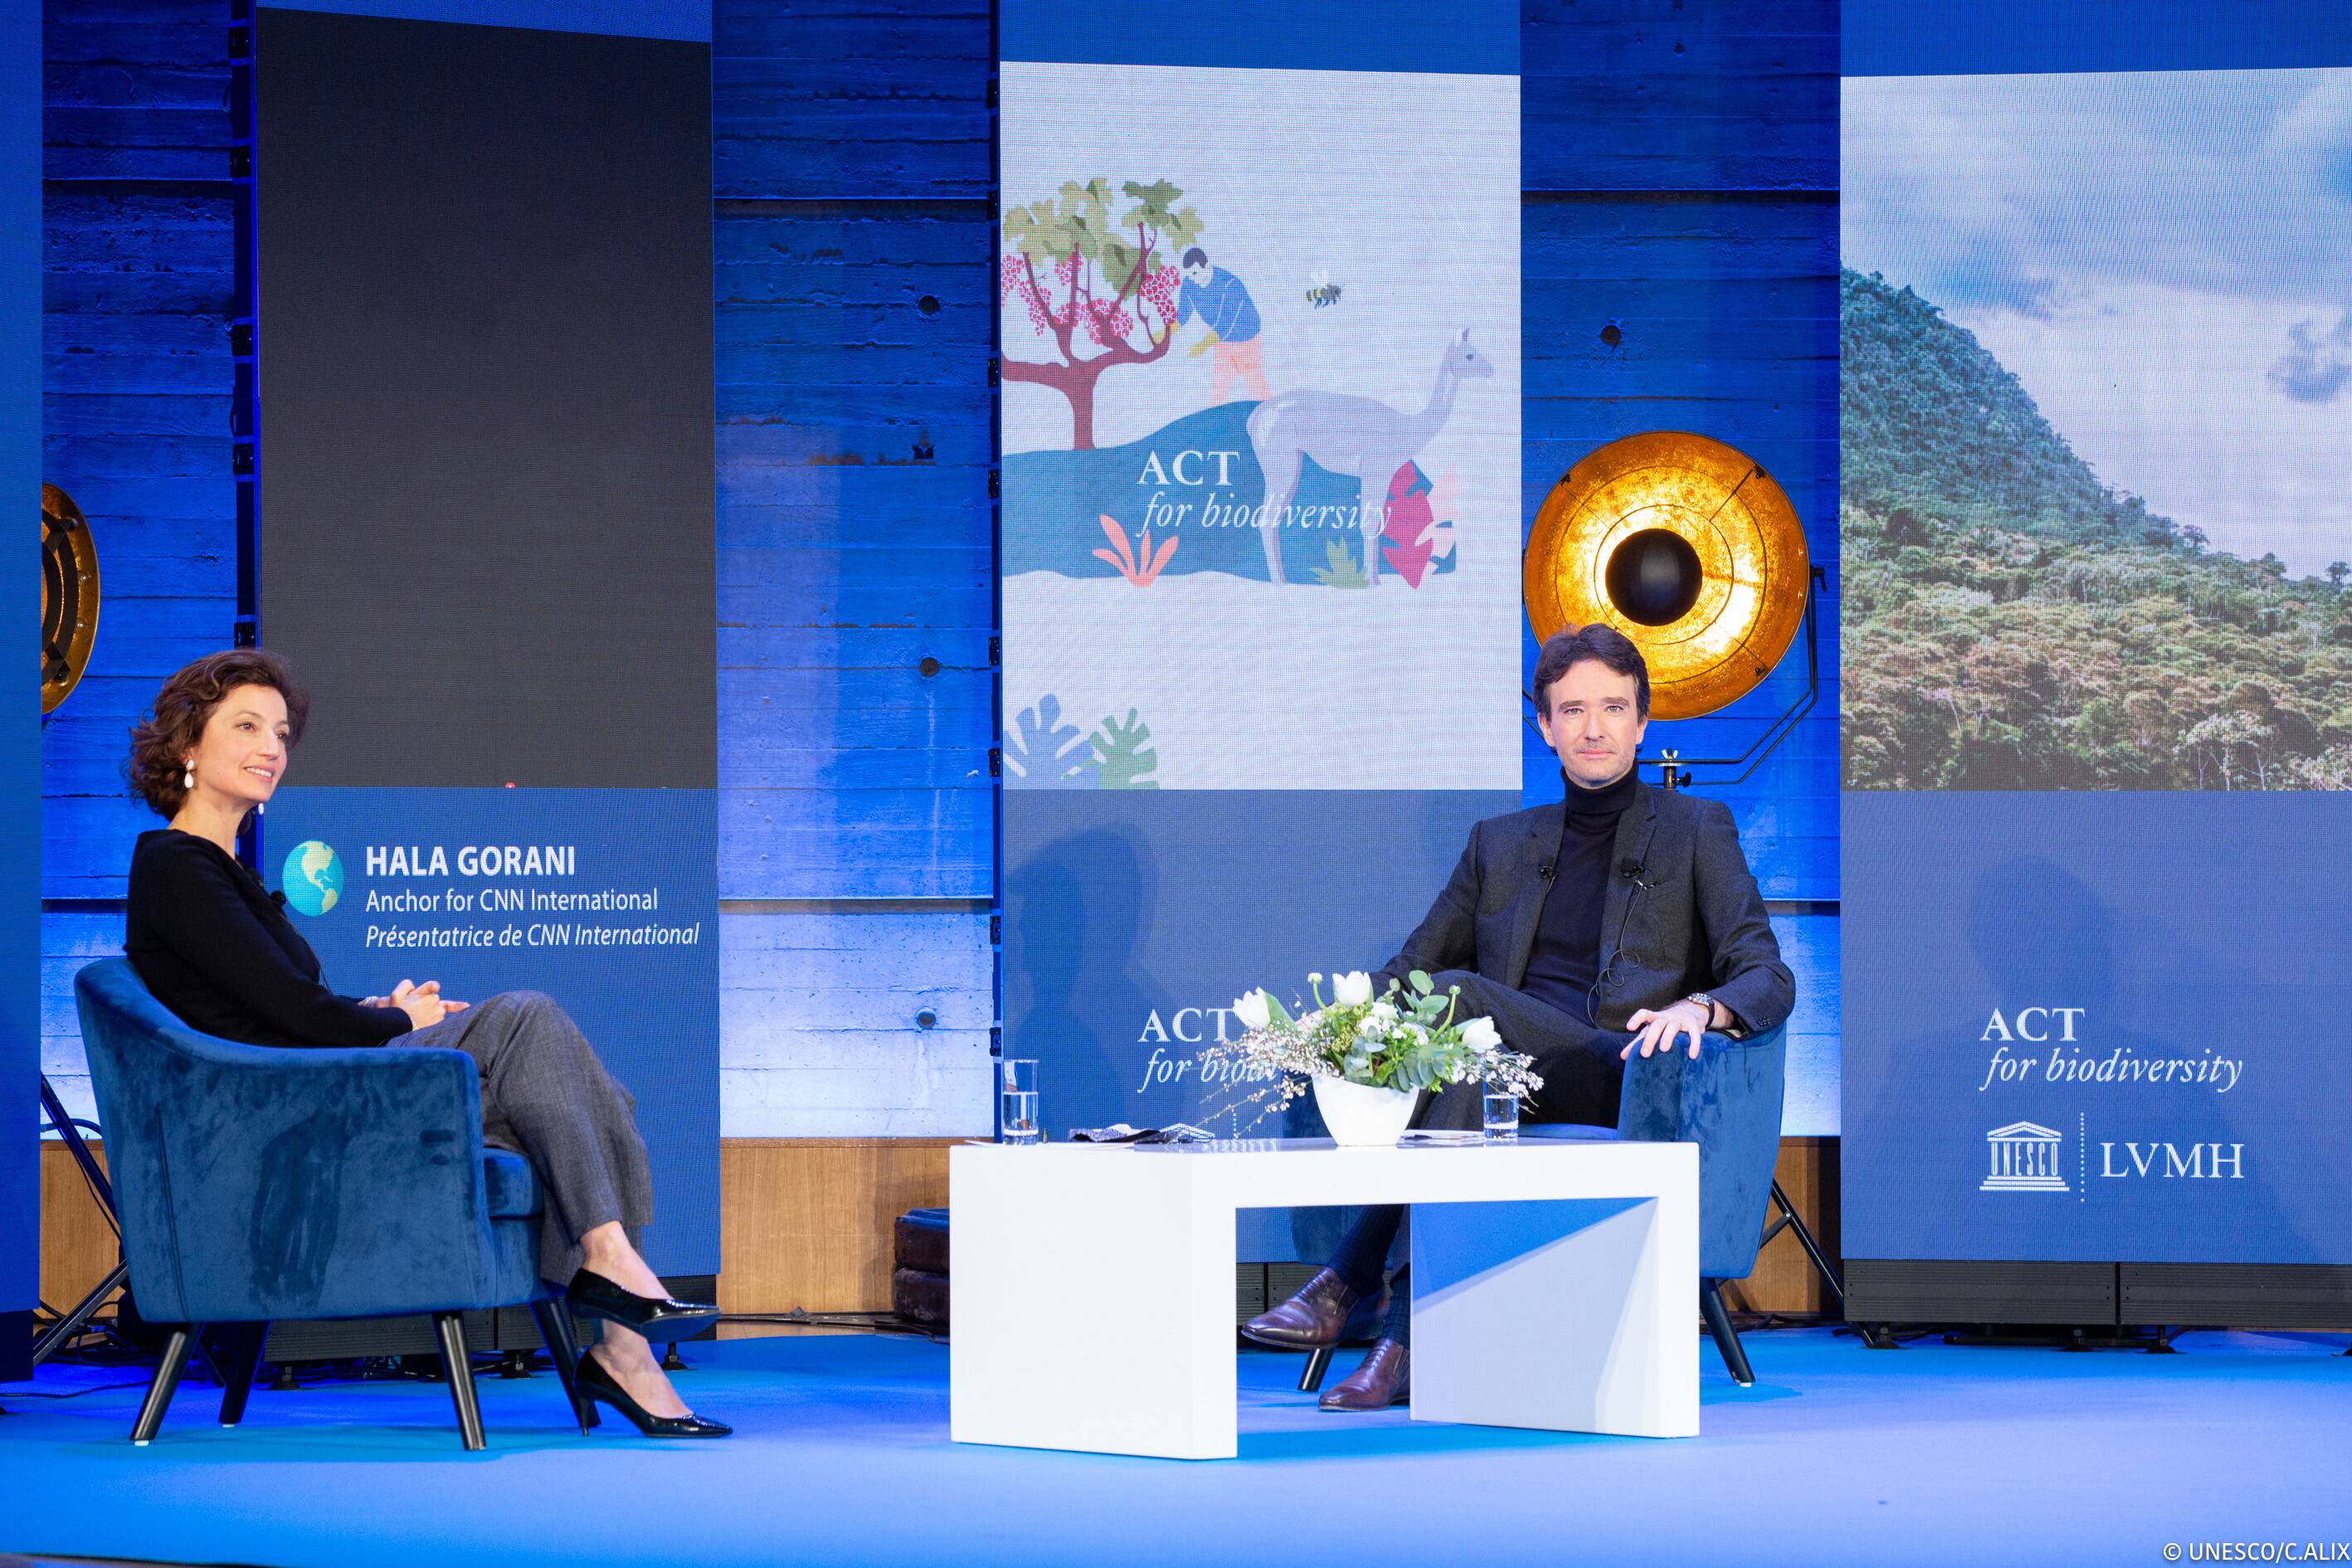 LVMH unveils its “Biodiversity” commitments and strengthens its partnership  with UNESCO with a project in the  - LVMH